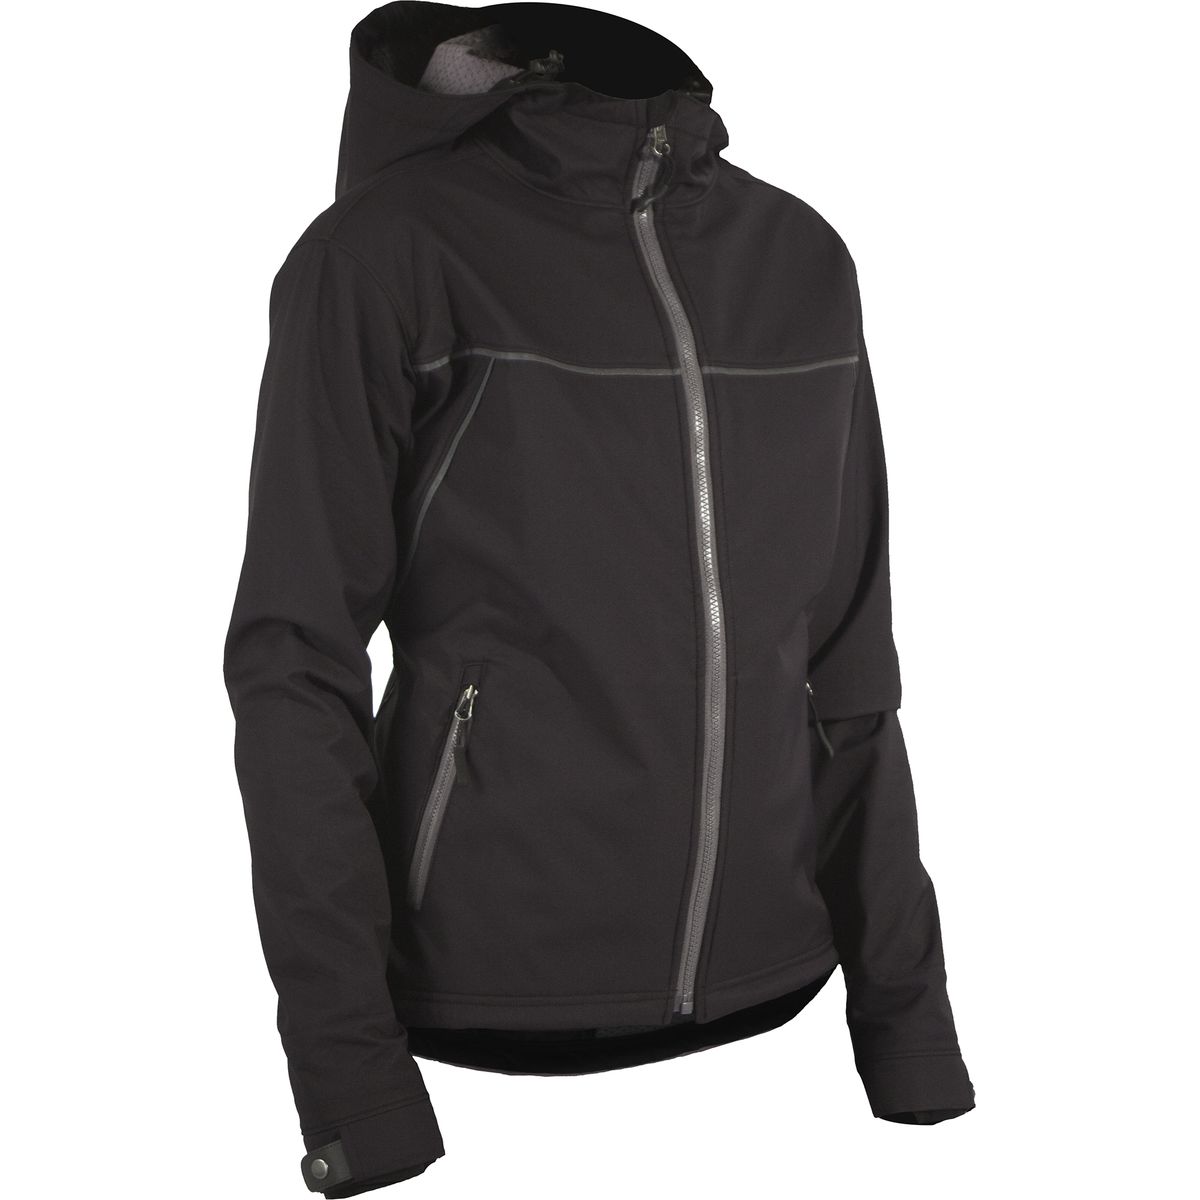 Showers Pass Rogue Hooded Jacket Womens